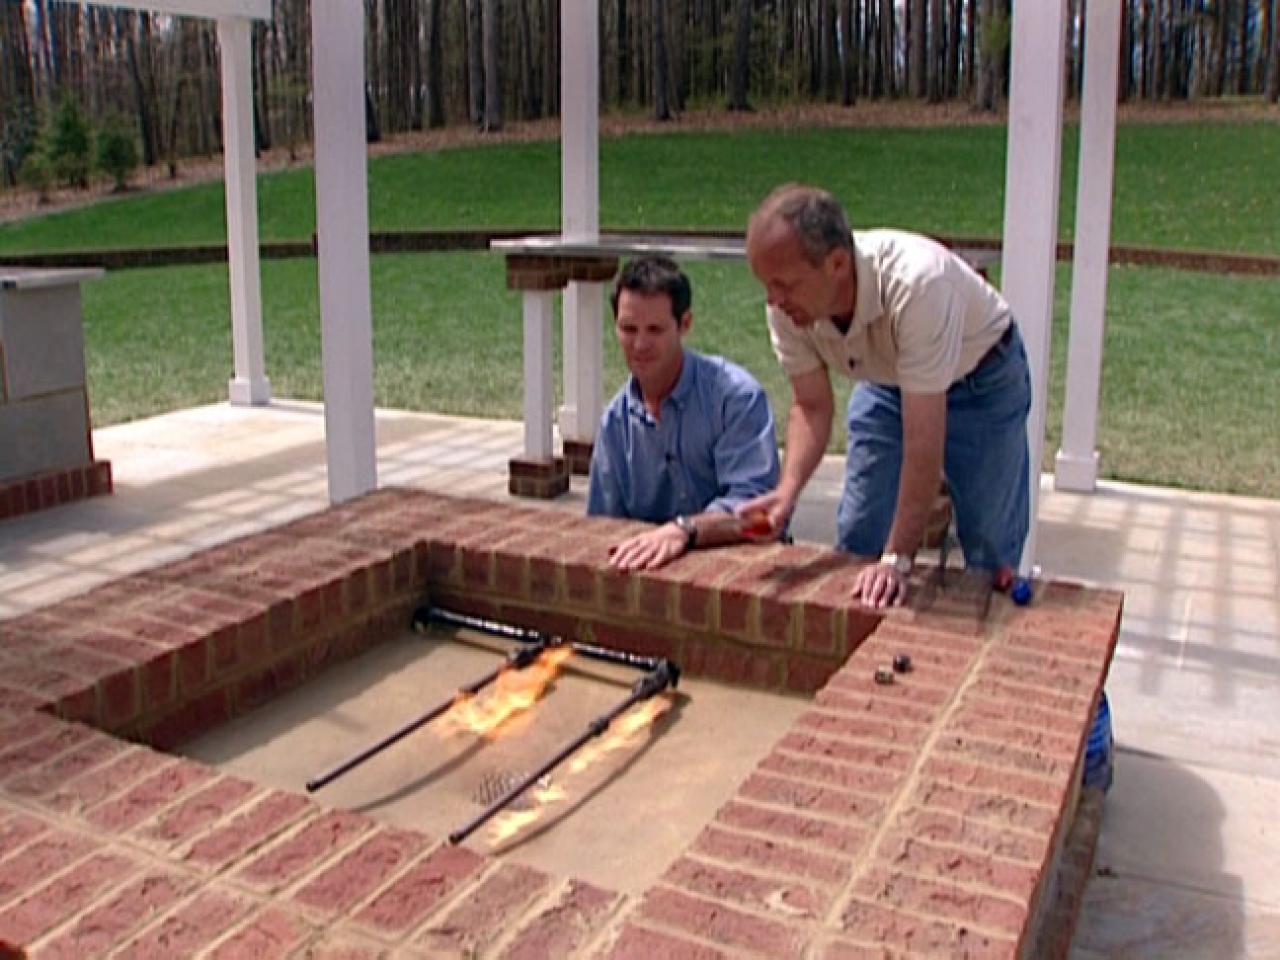 How To Hook Up The Gas For A Fire Pit, How To Build A Gas Fire Pit